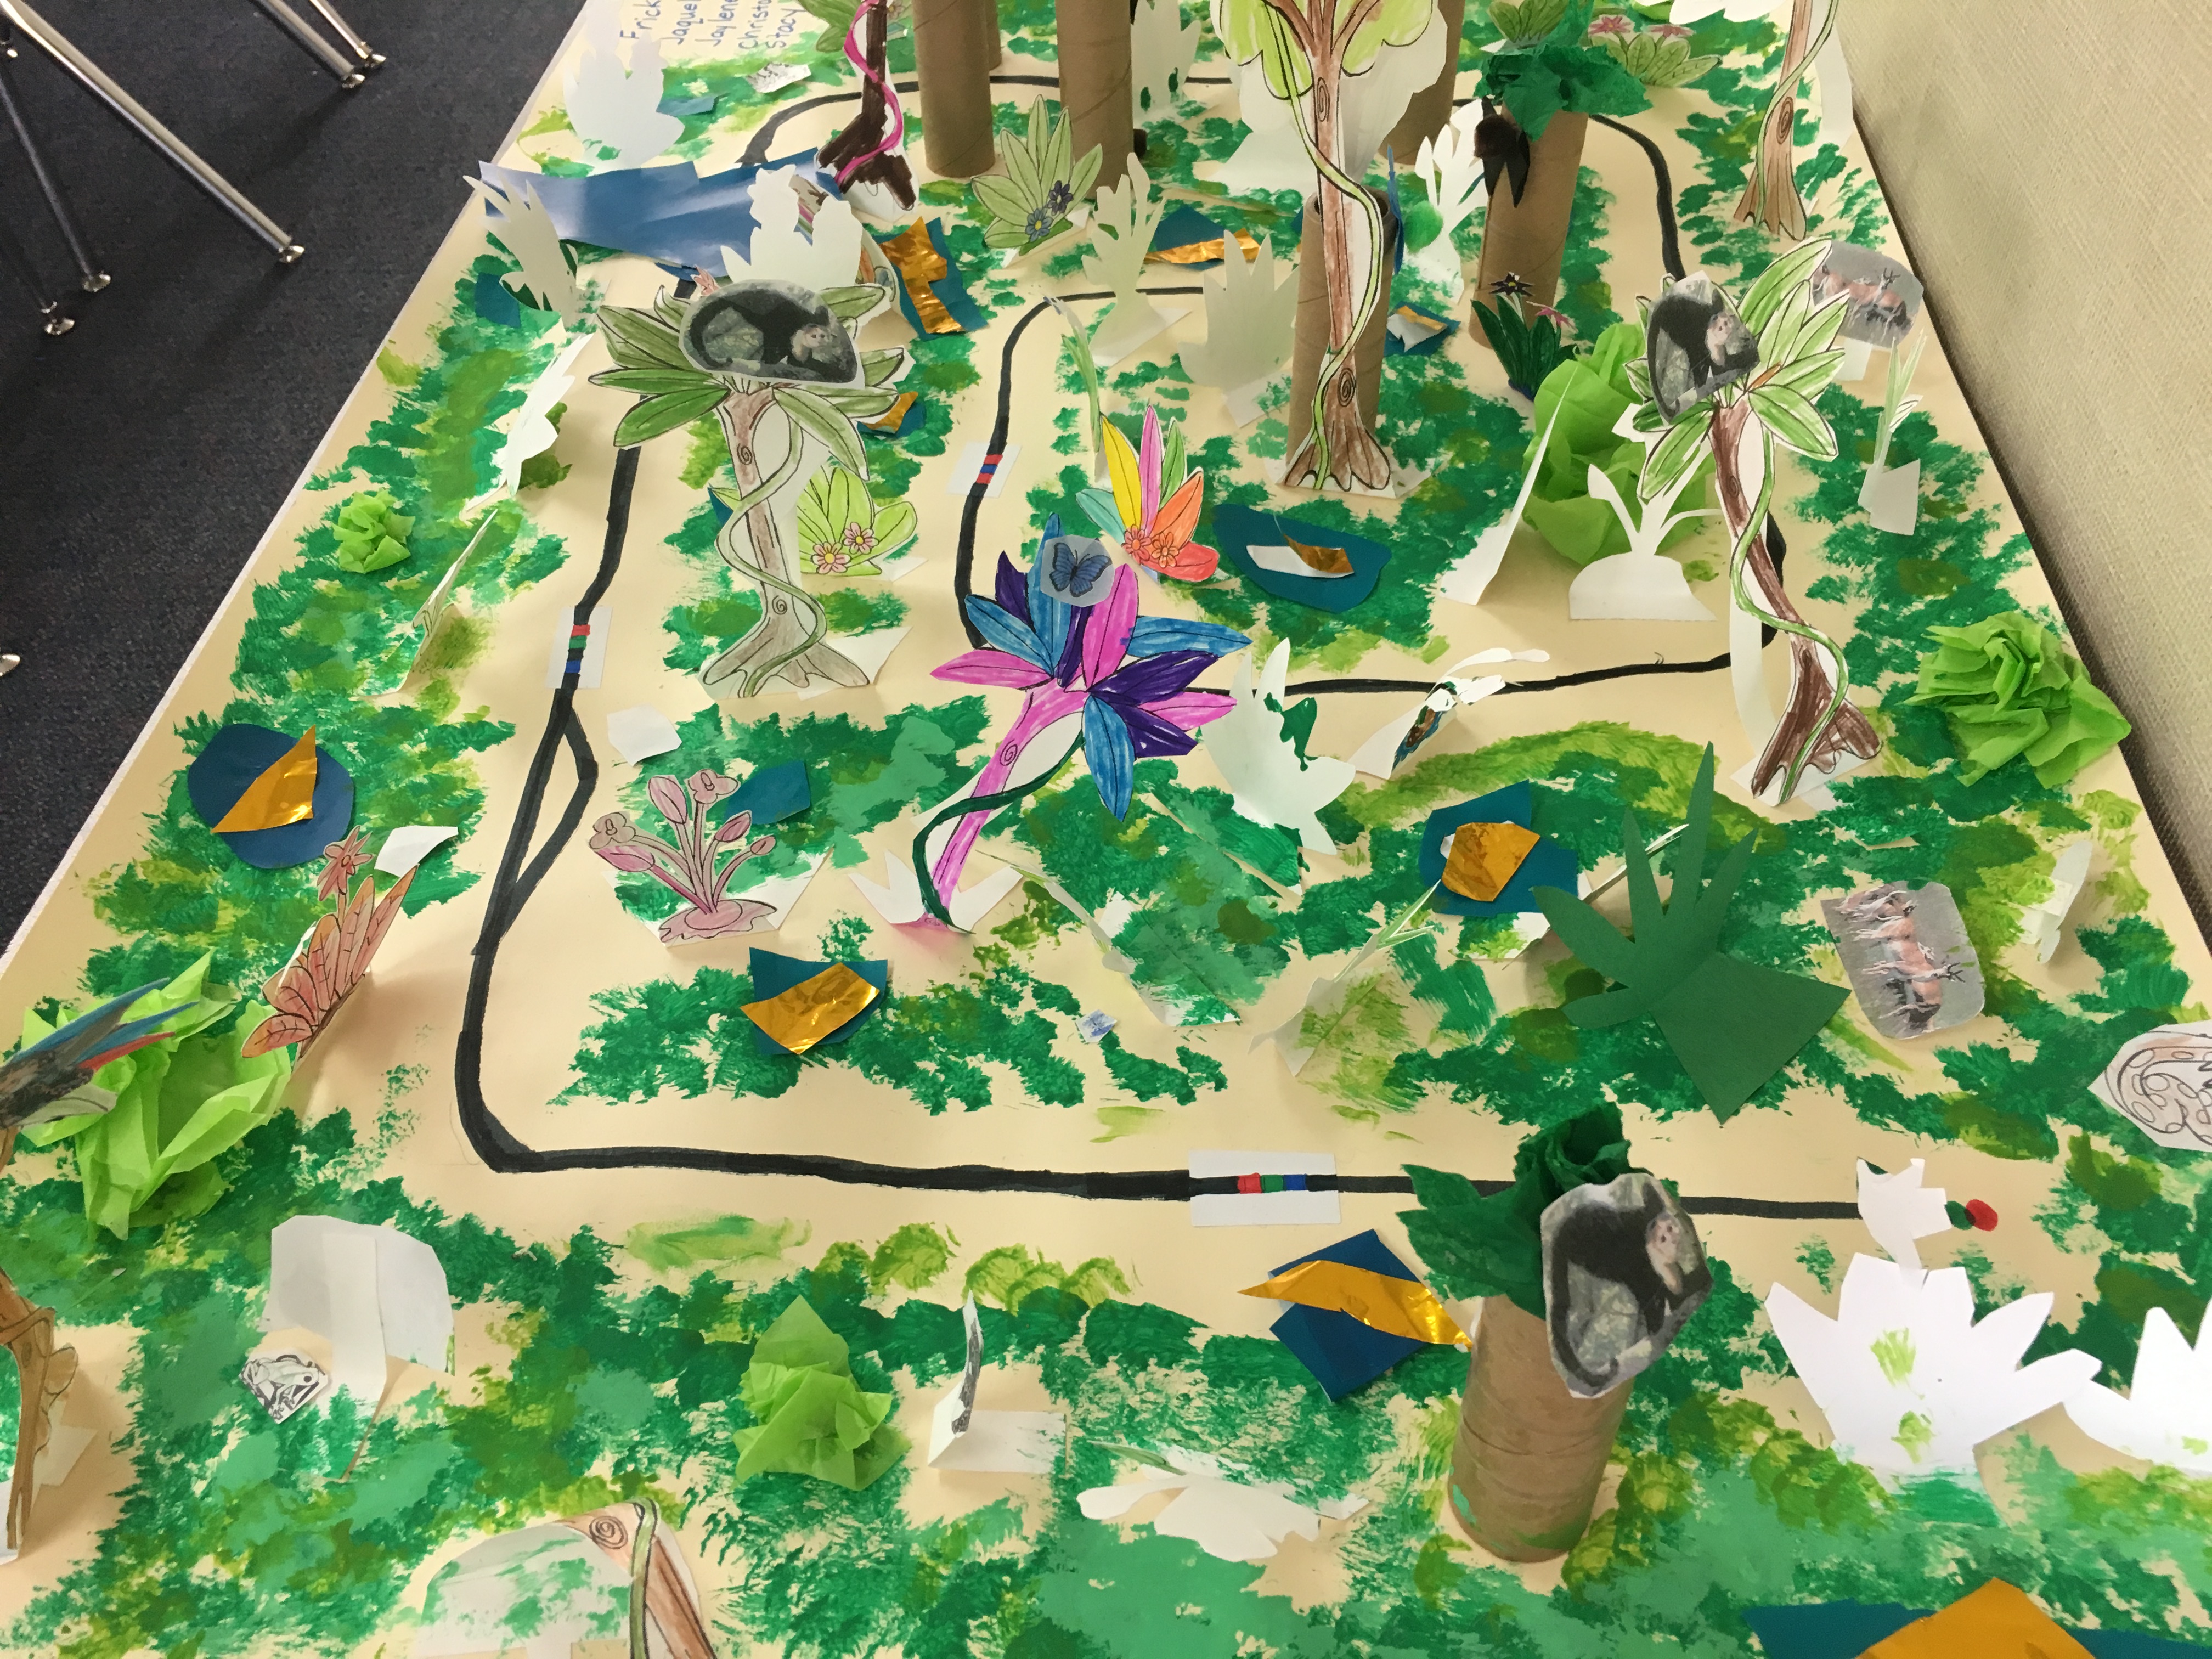 Ozobot journey through the rainforest